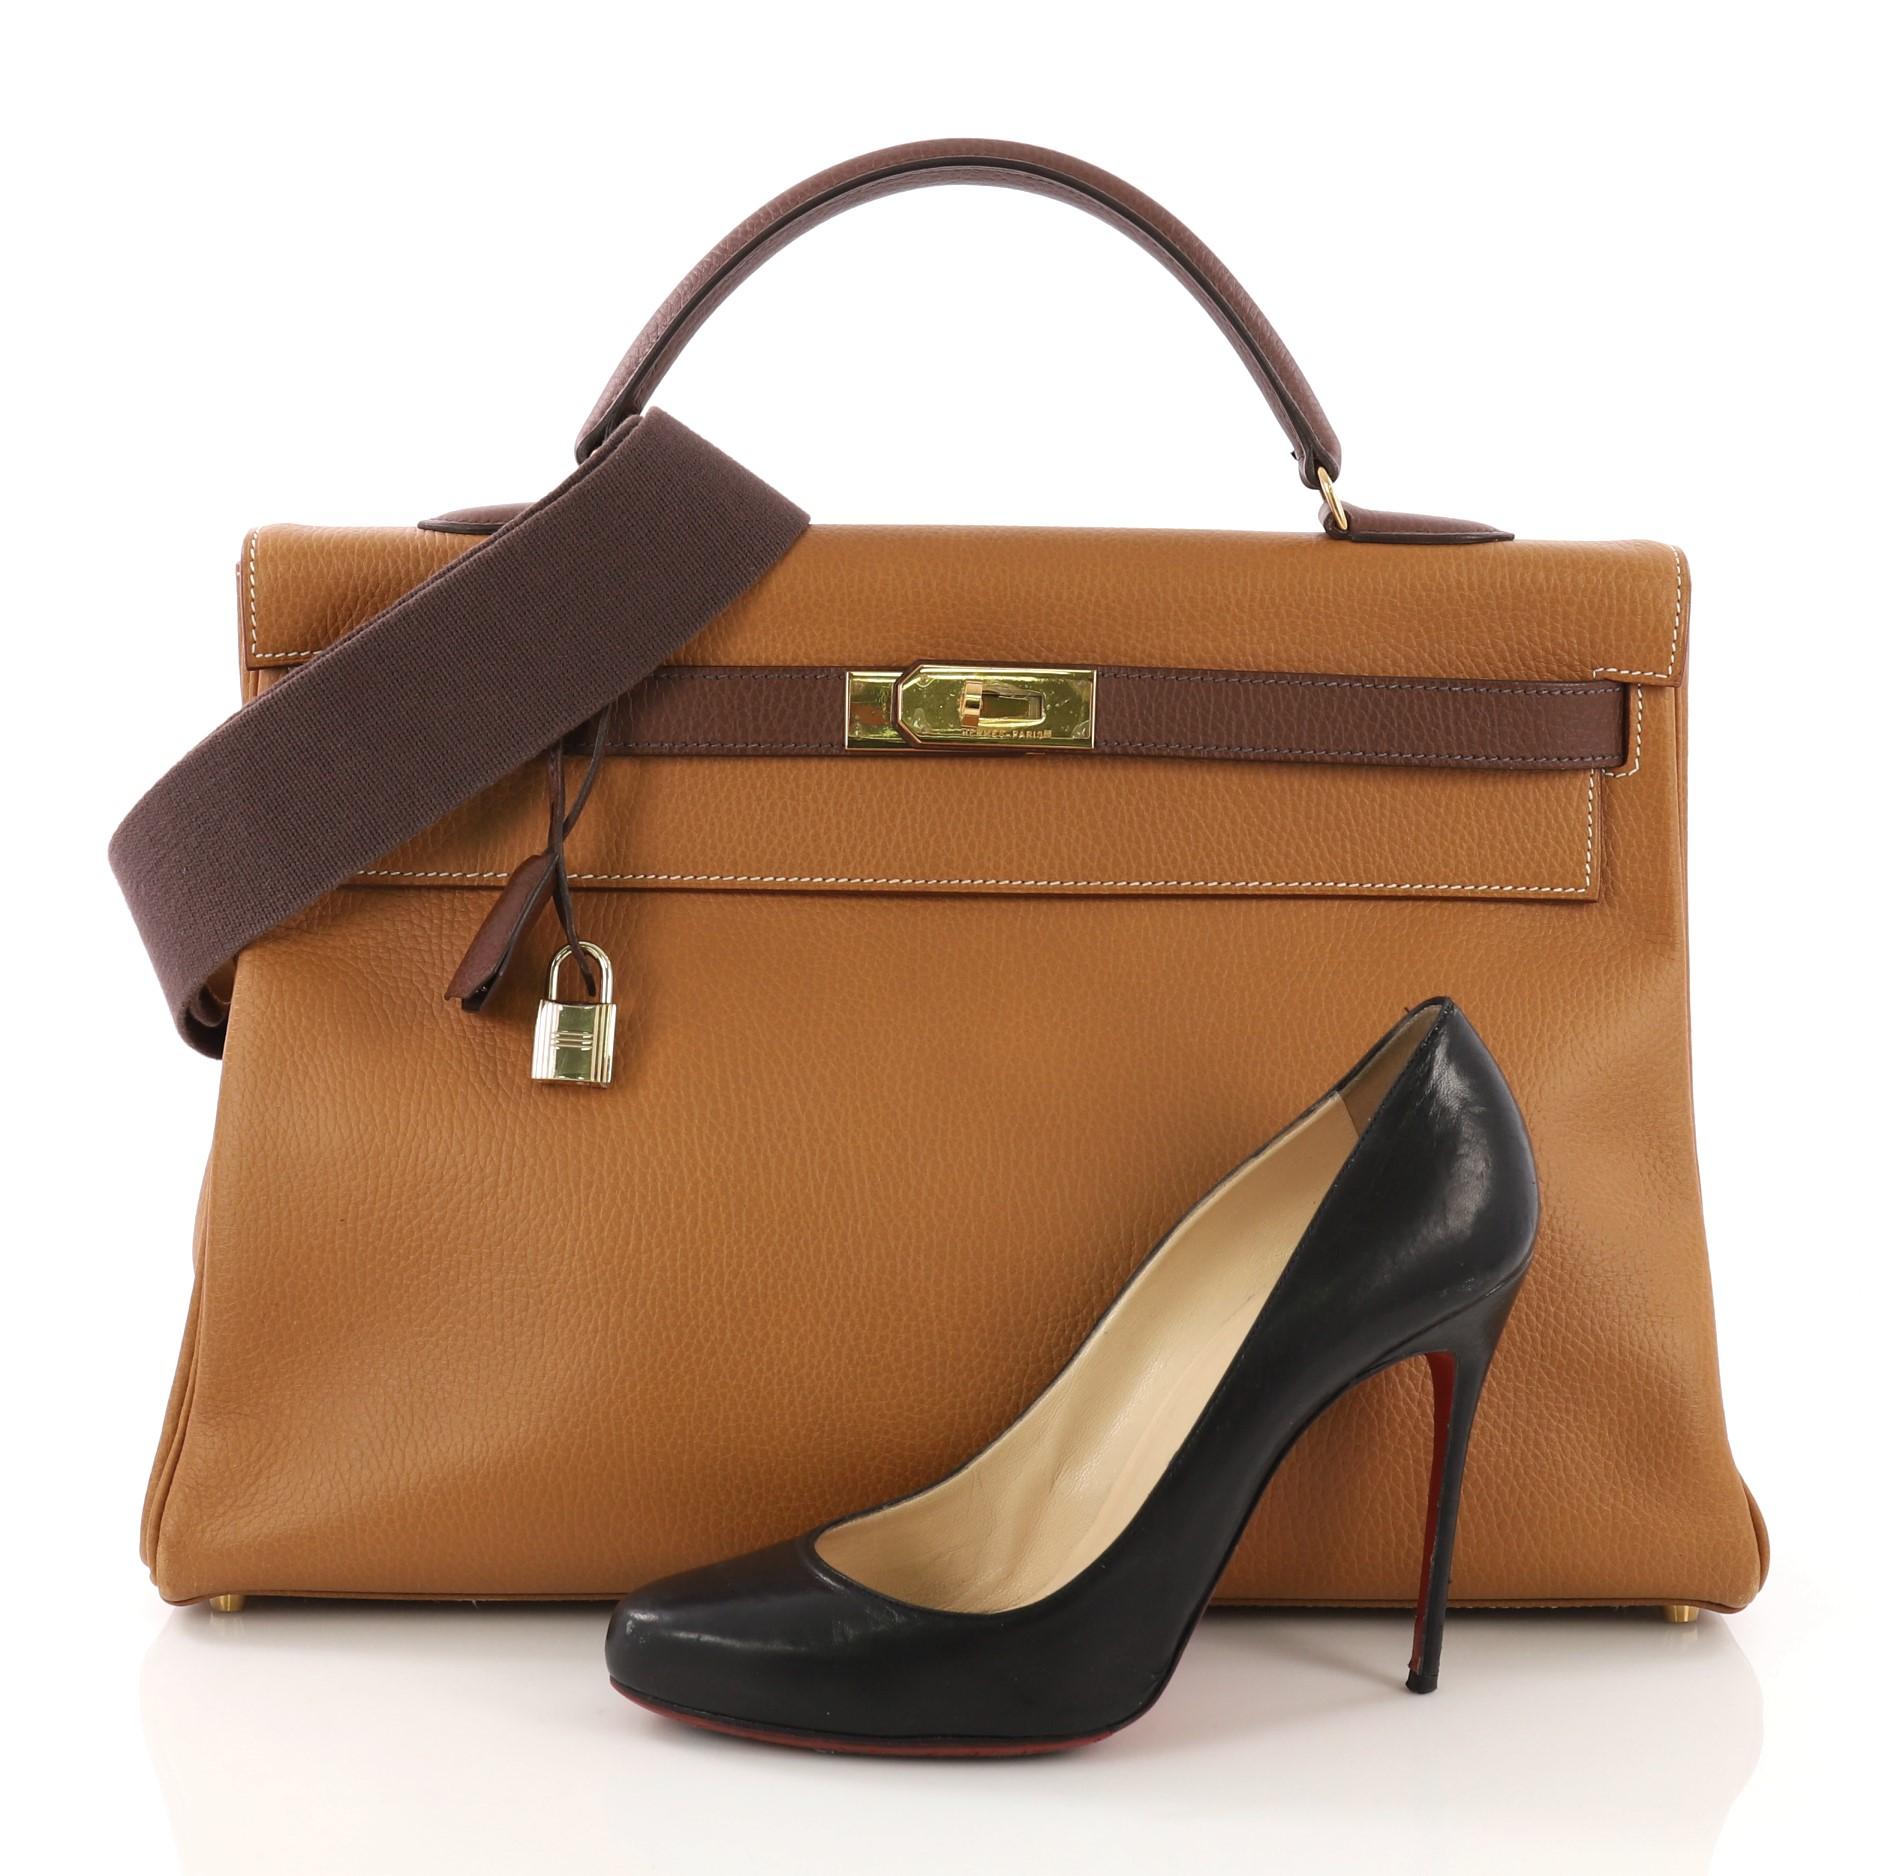 This Hermes Kelly Handbag Bicolor Ardennes with Gold Hardware 40, crafted in Natural and Marron Fonce Ardennes leather, features a single rolled top handle, frontal flap, and gold hardware. Its turn-lock closure opens to a Natural brown Chevre